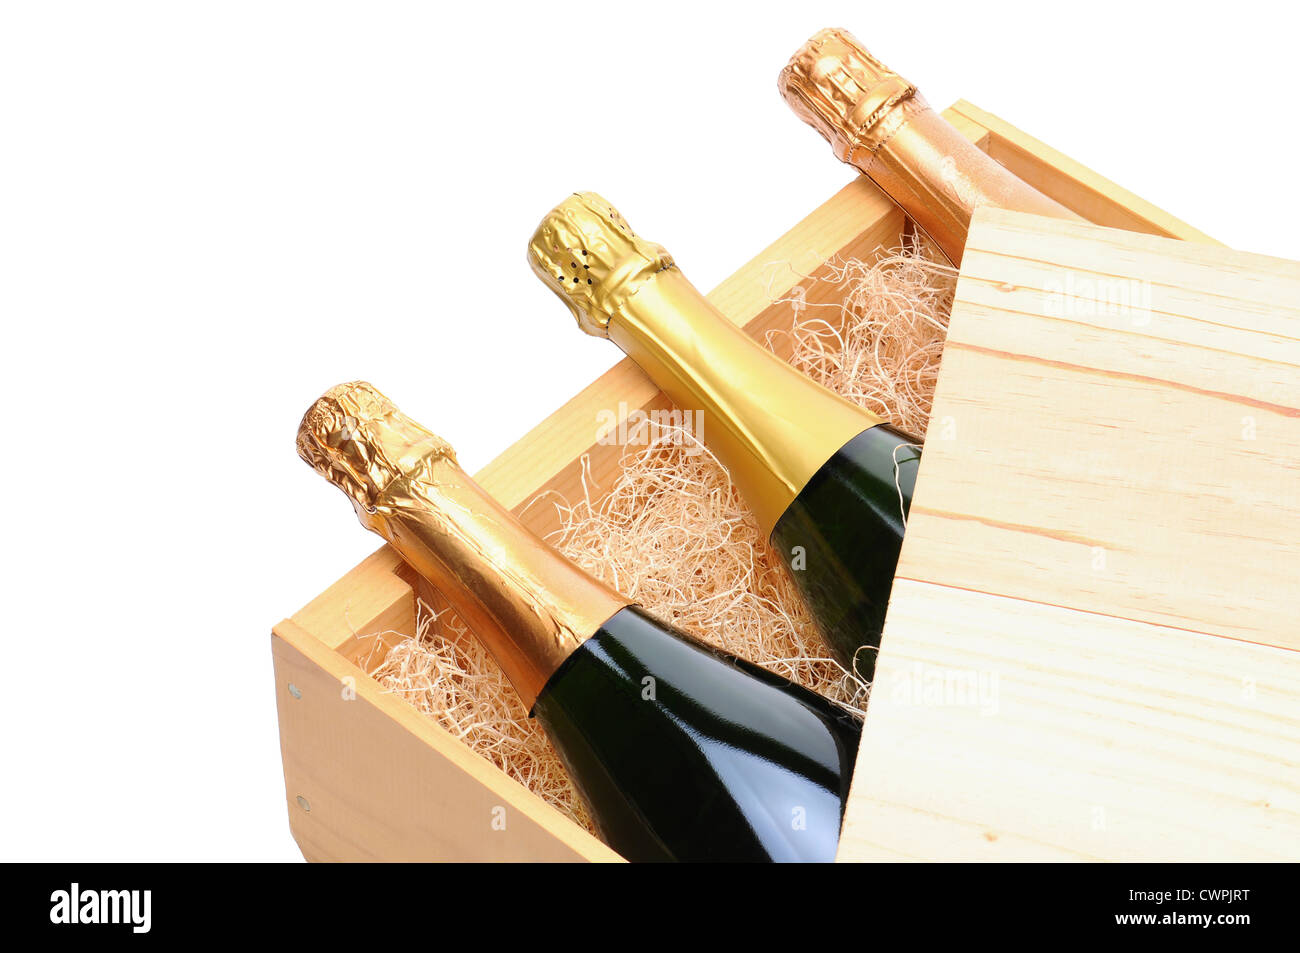 Closeup of three Champagne bottles on their side in a wooden crate. Stock Photo